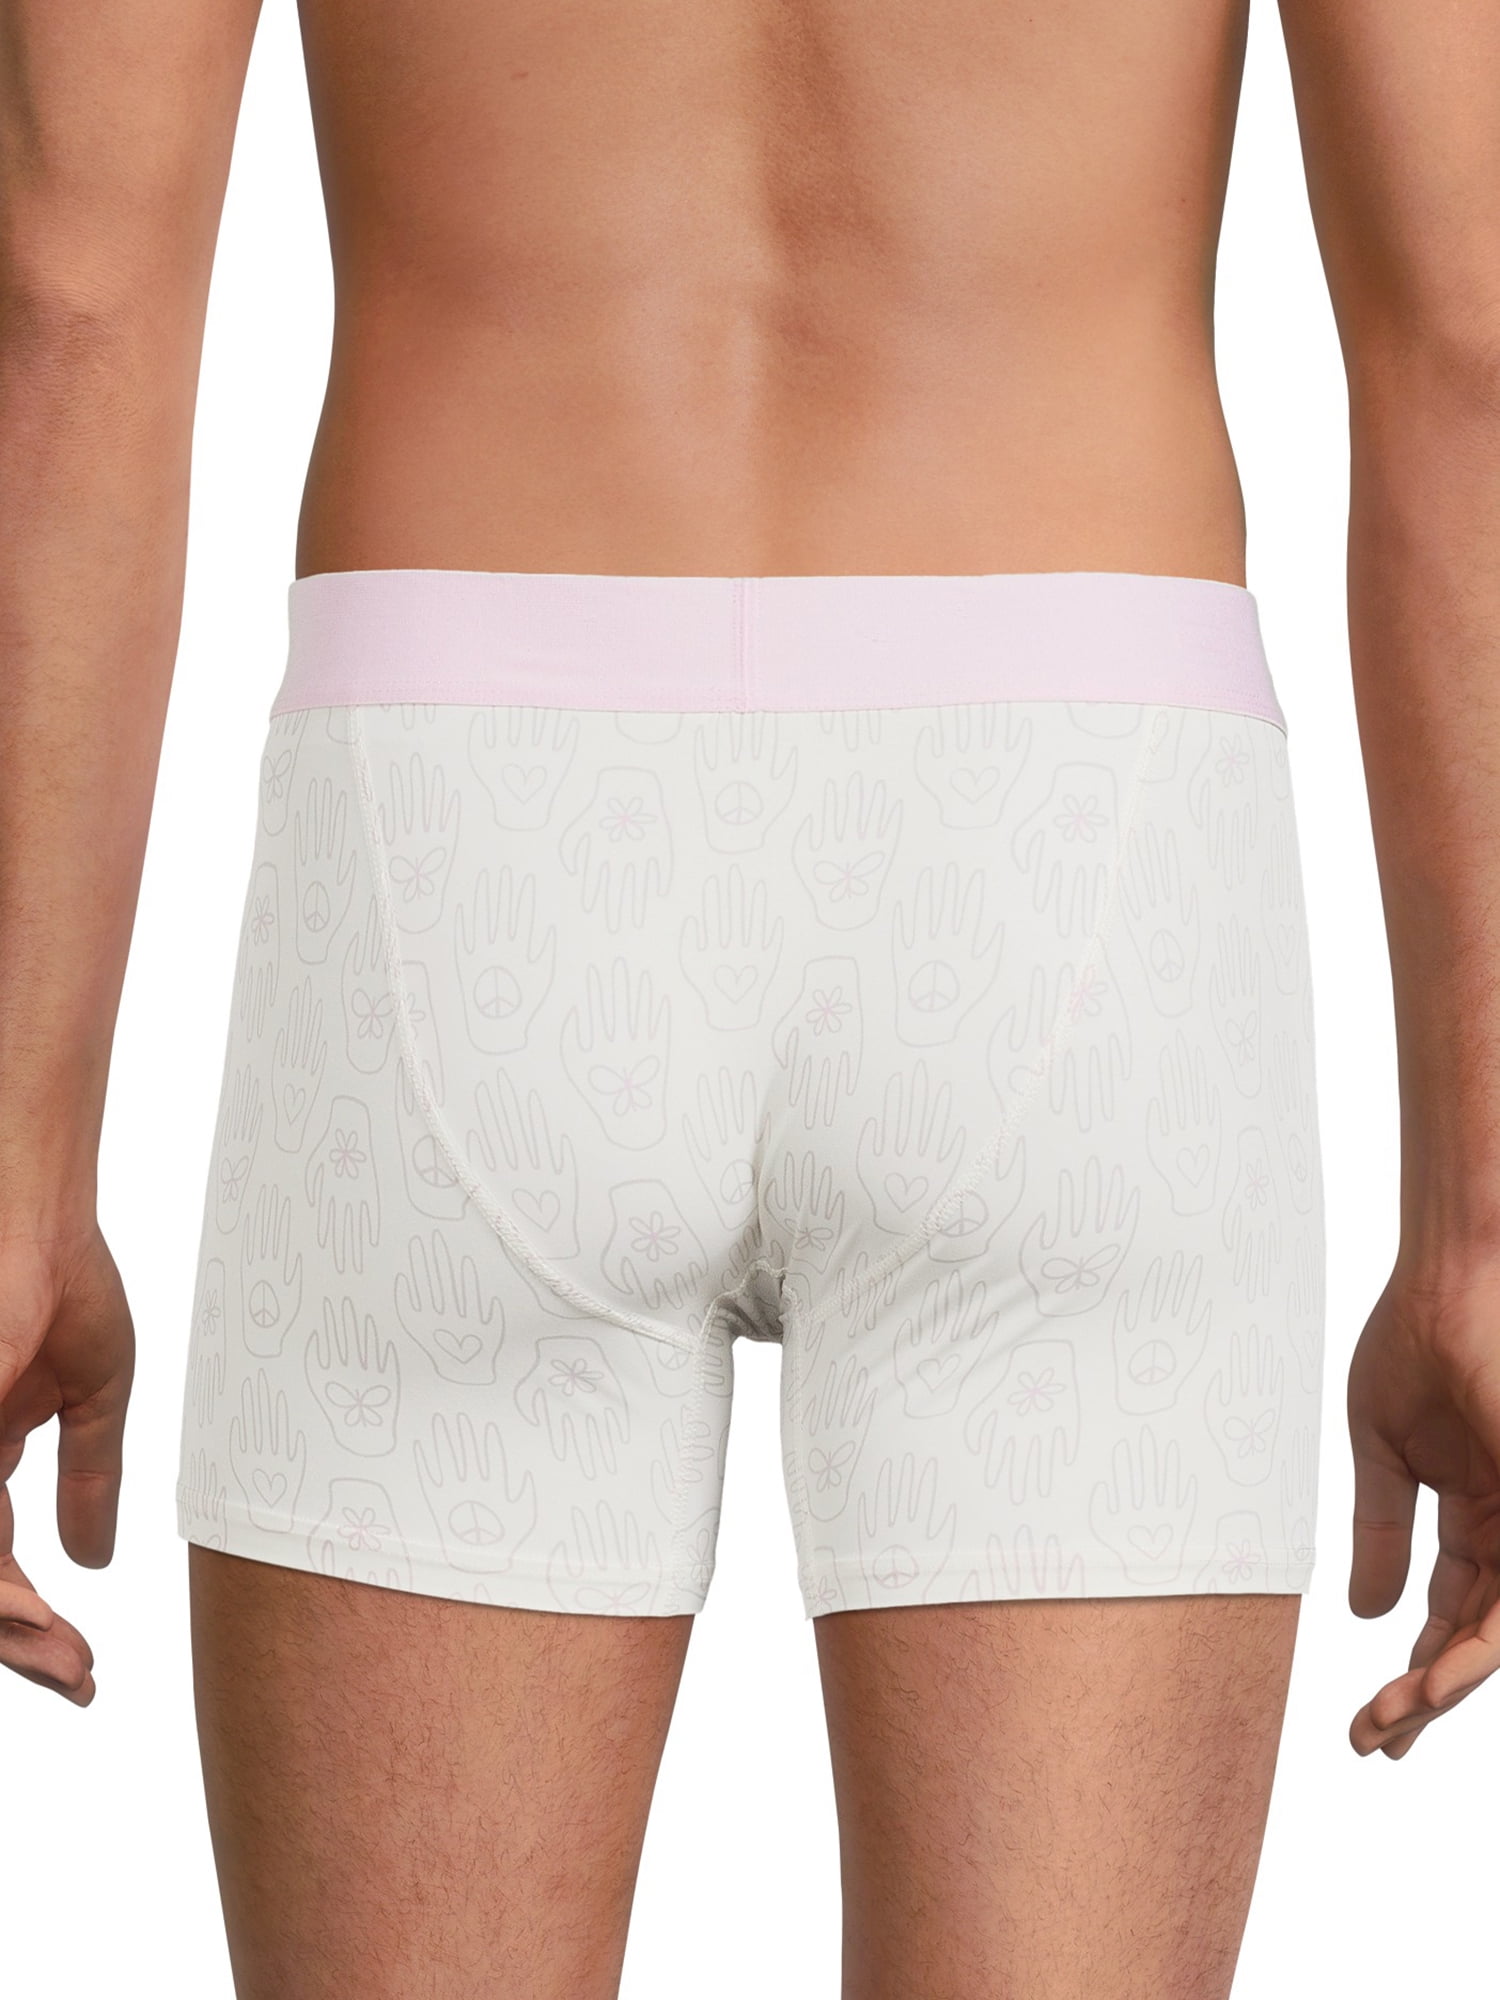 Second Life Marketplace - 69 Park Ave GQ - Valentine Boxers - Mens